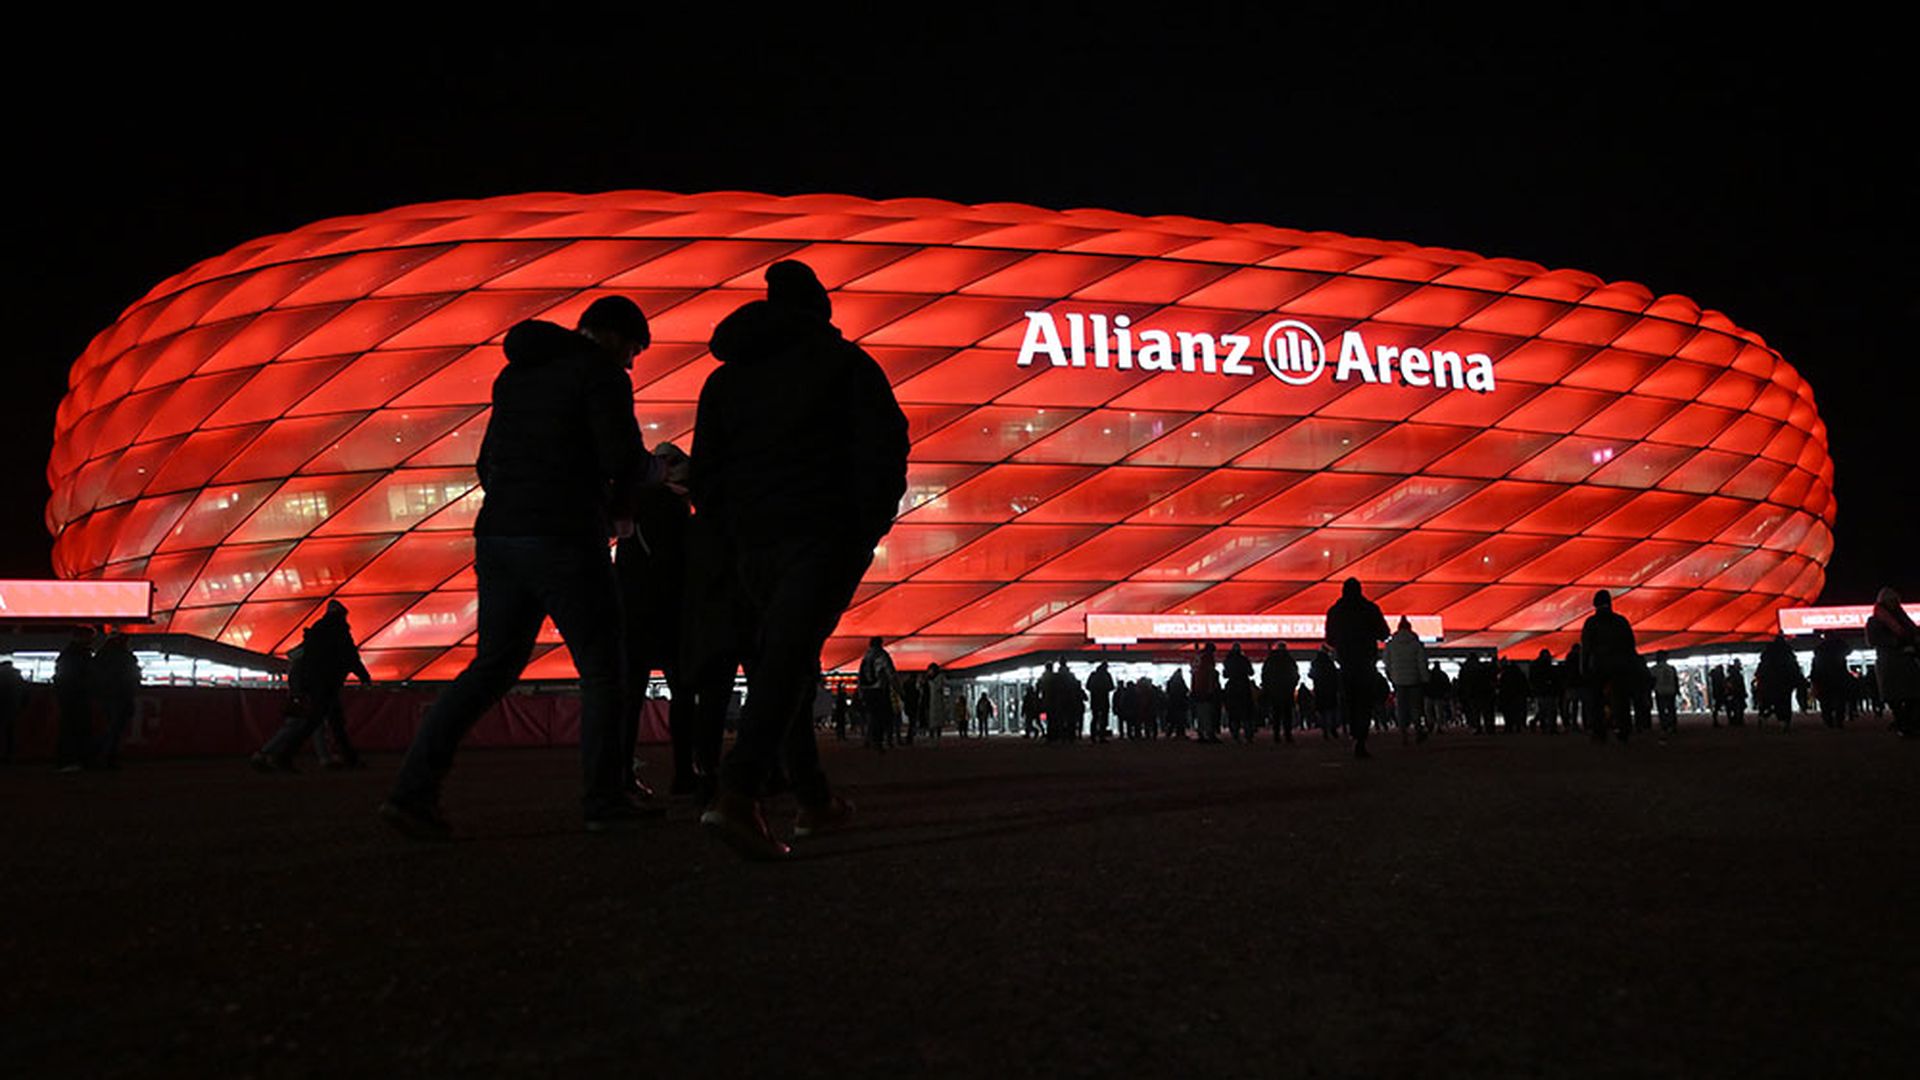 The Panthers will play at Allianz Arena, home of FC Bayern Munich, in Munich this fall. Photo: Sebastian Widmann/Getty Images